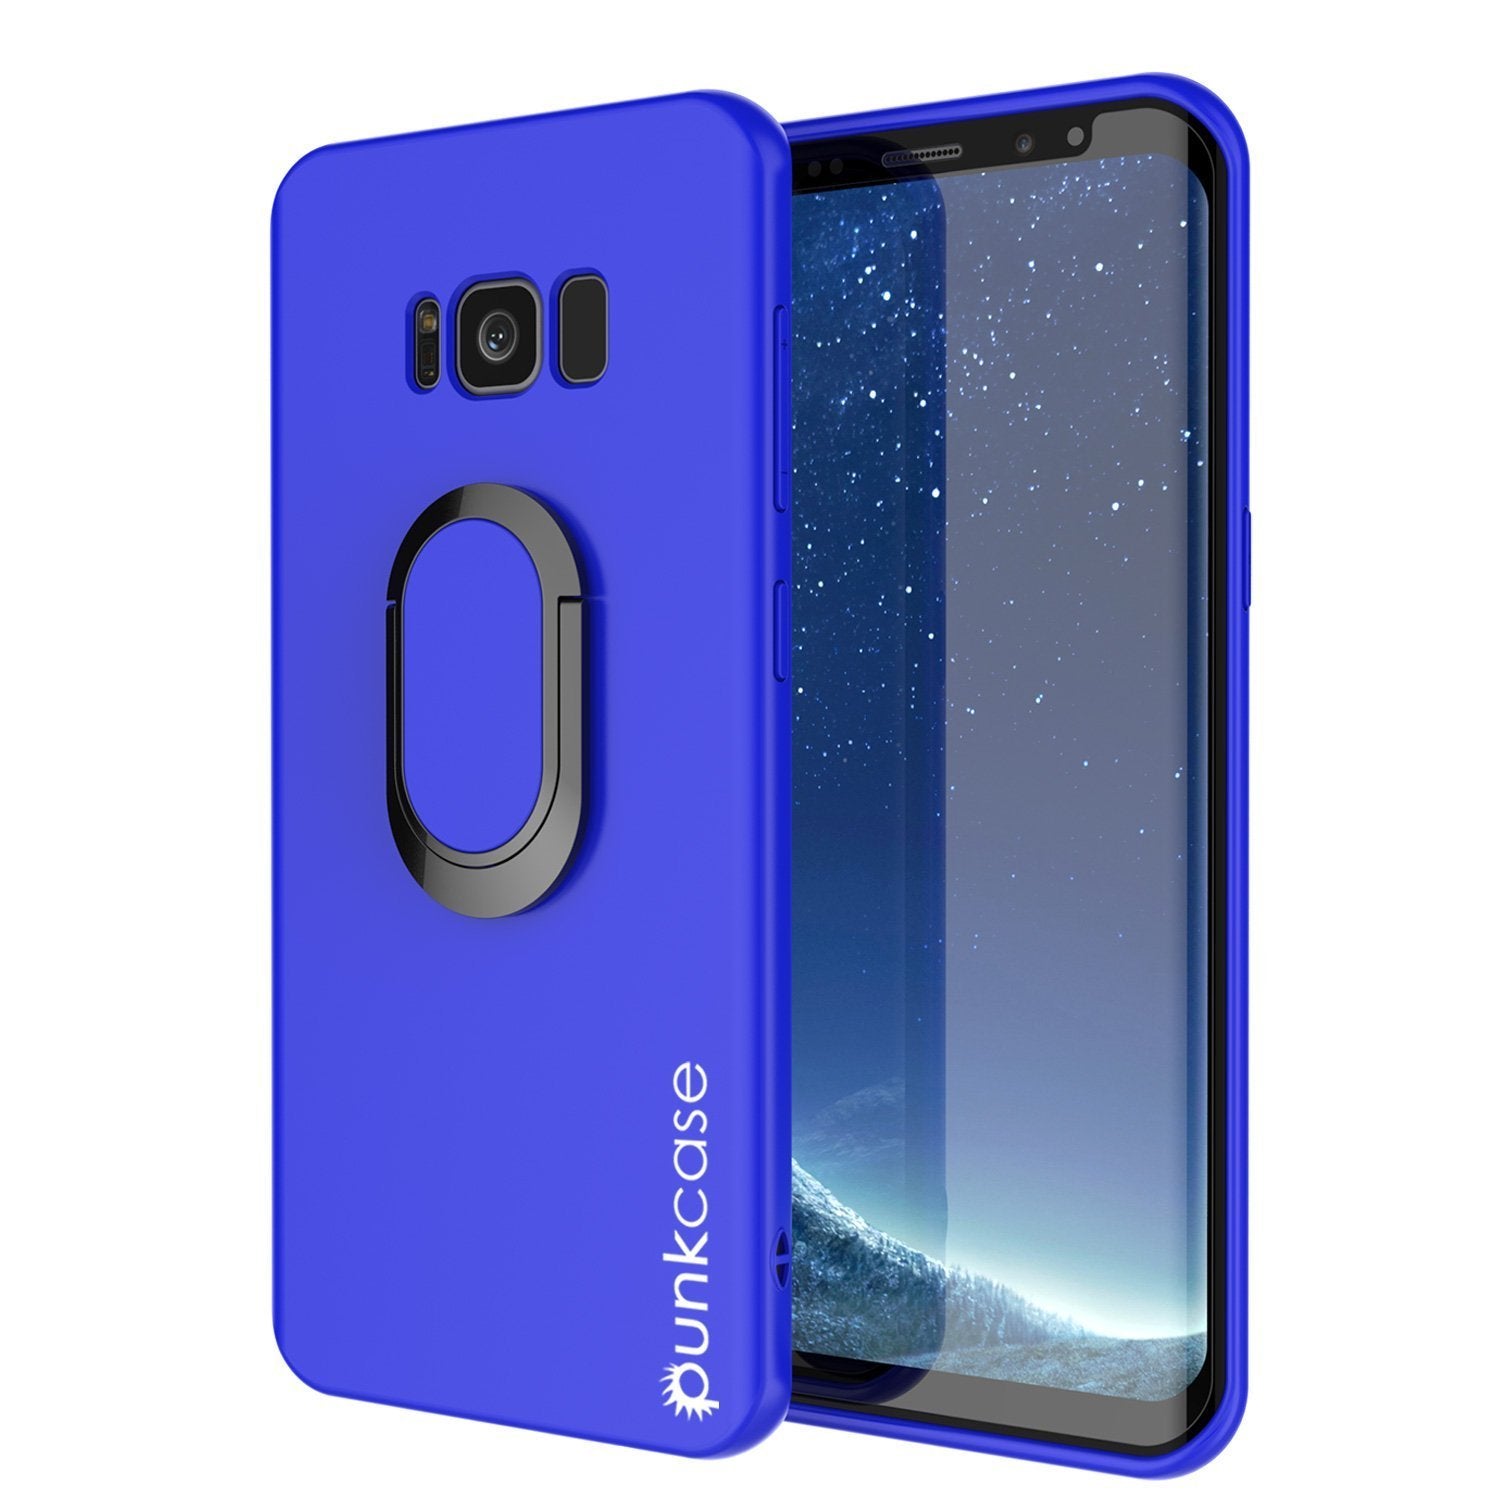 Galaxy S8 Case, Punkcase Magnetix Protective TPU Cover Blue